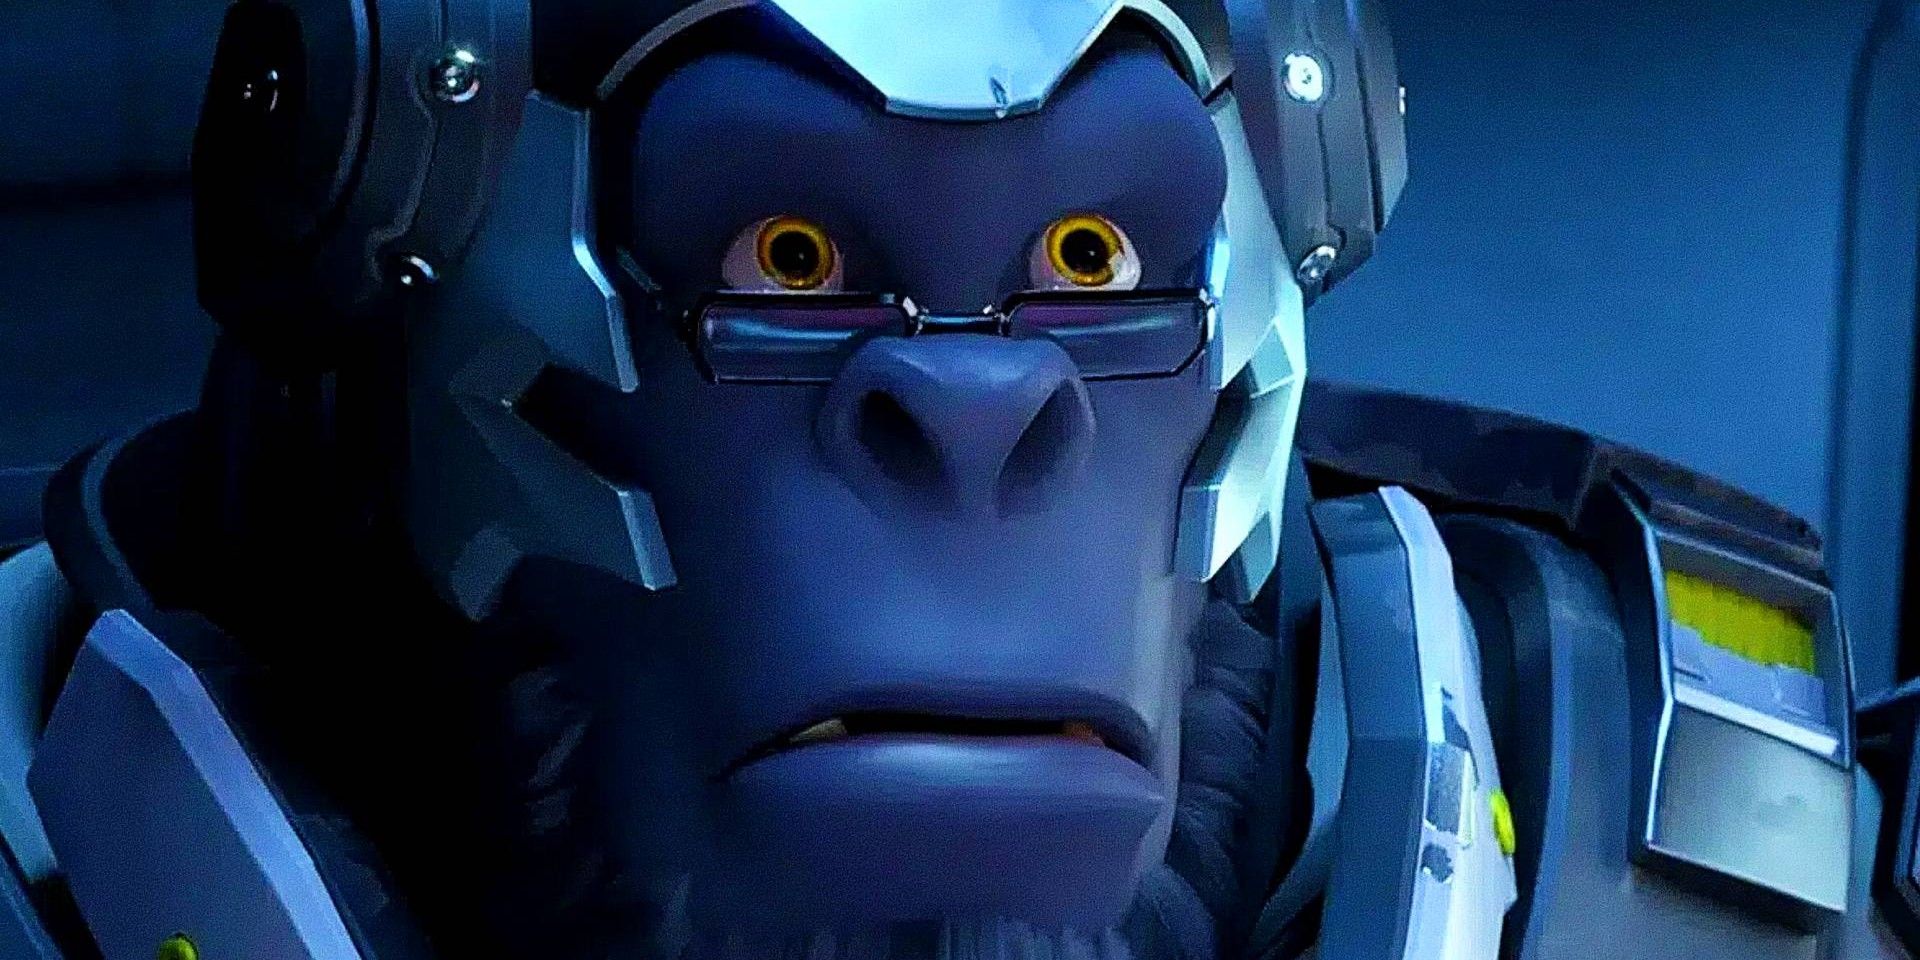 Overwatch screenshot of Winston with a shocked facial expression